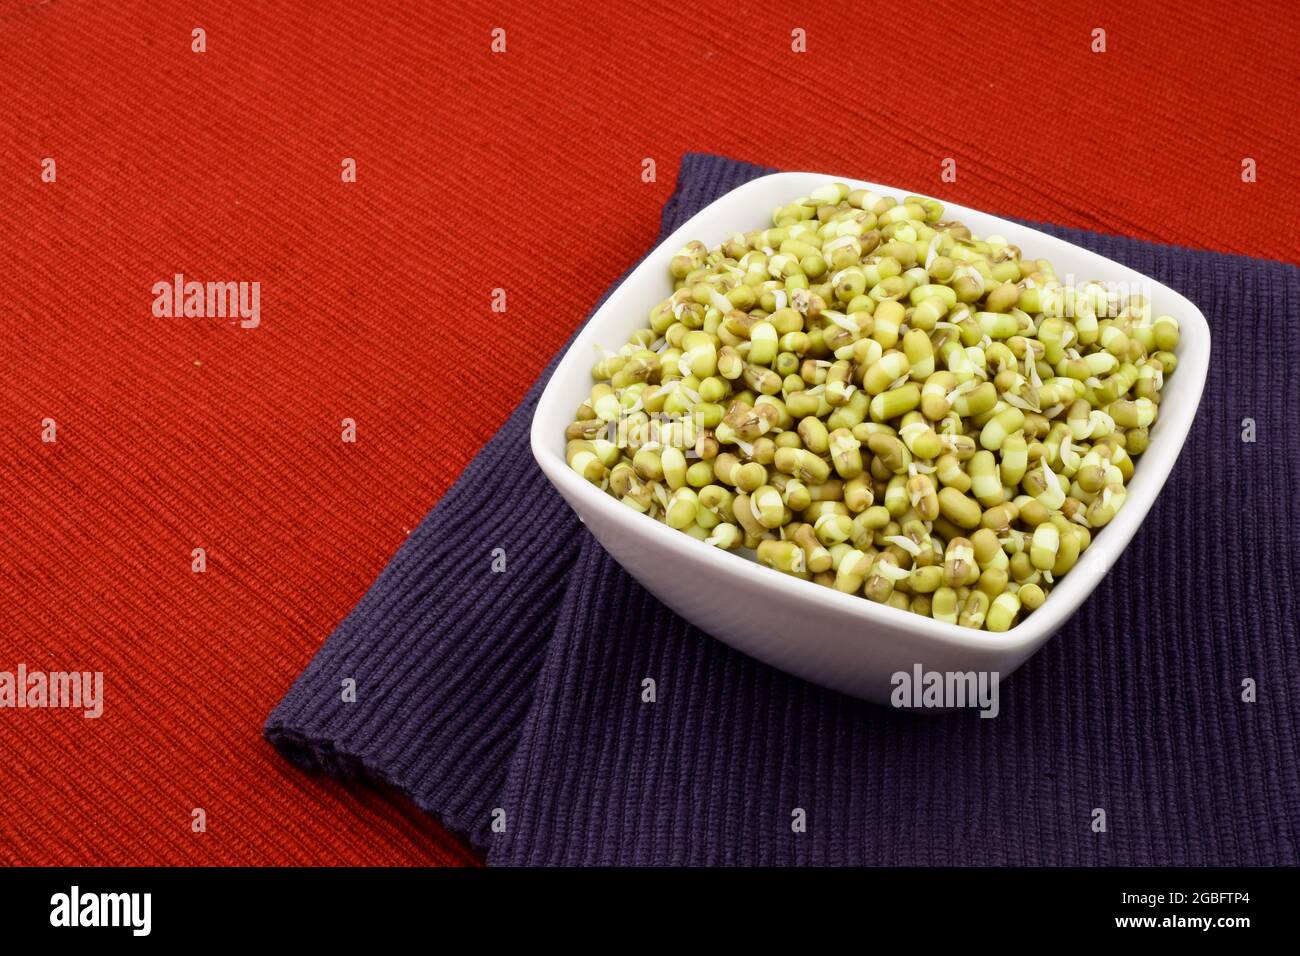 Sprouts Mung Bean In Bowl On Placemat Stock Photo